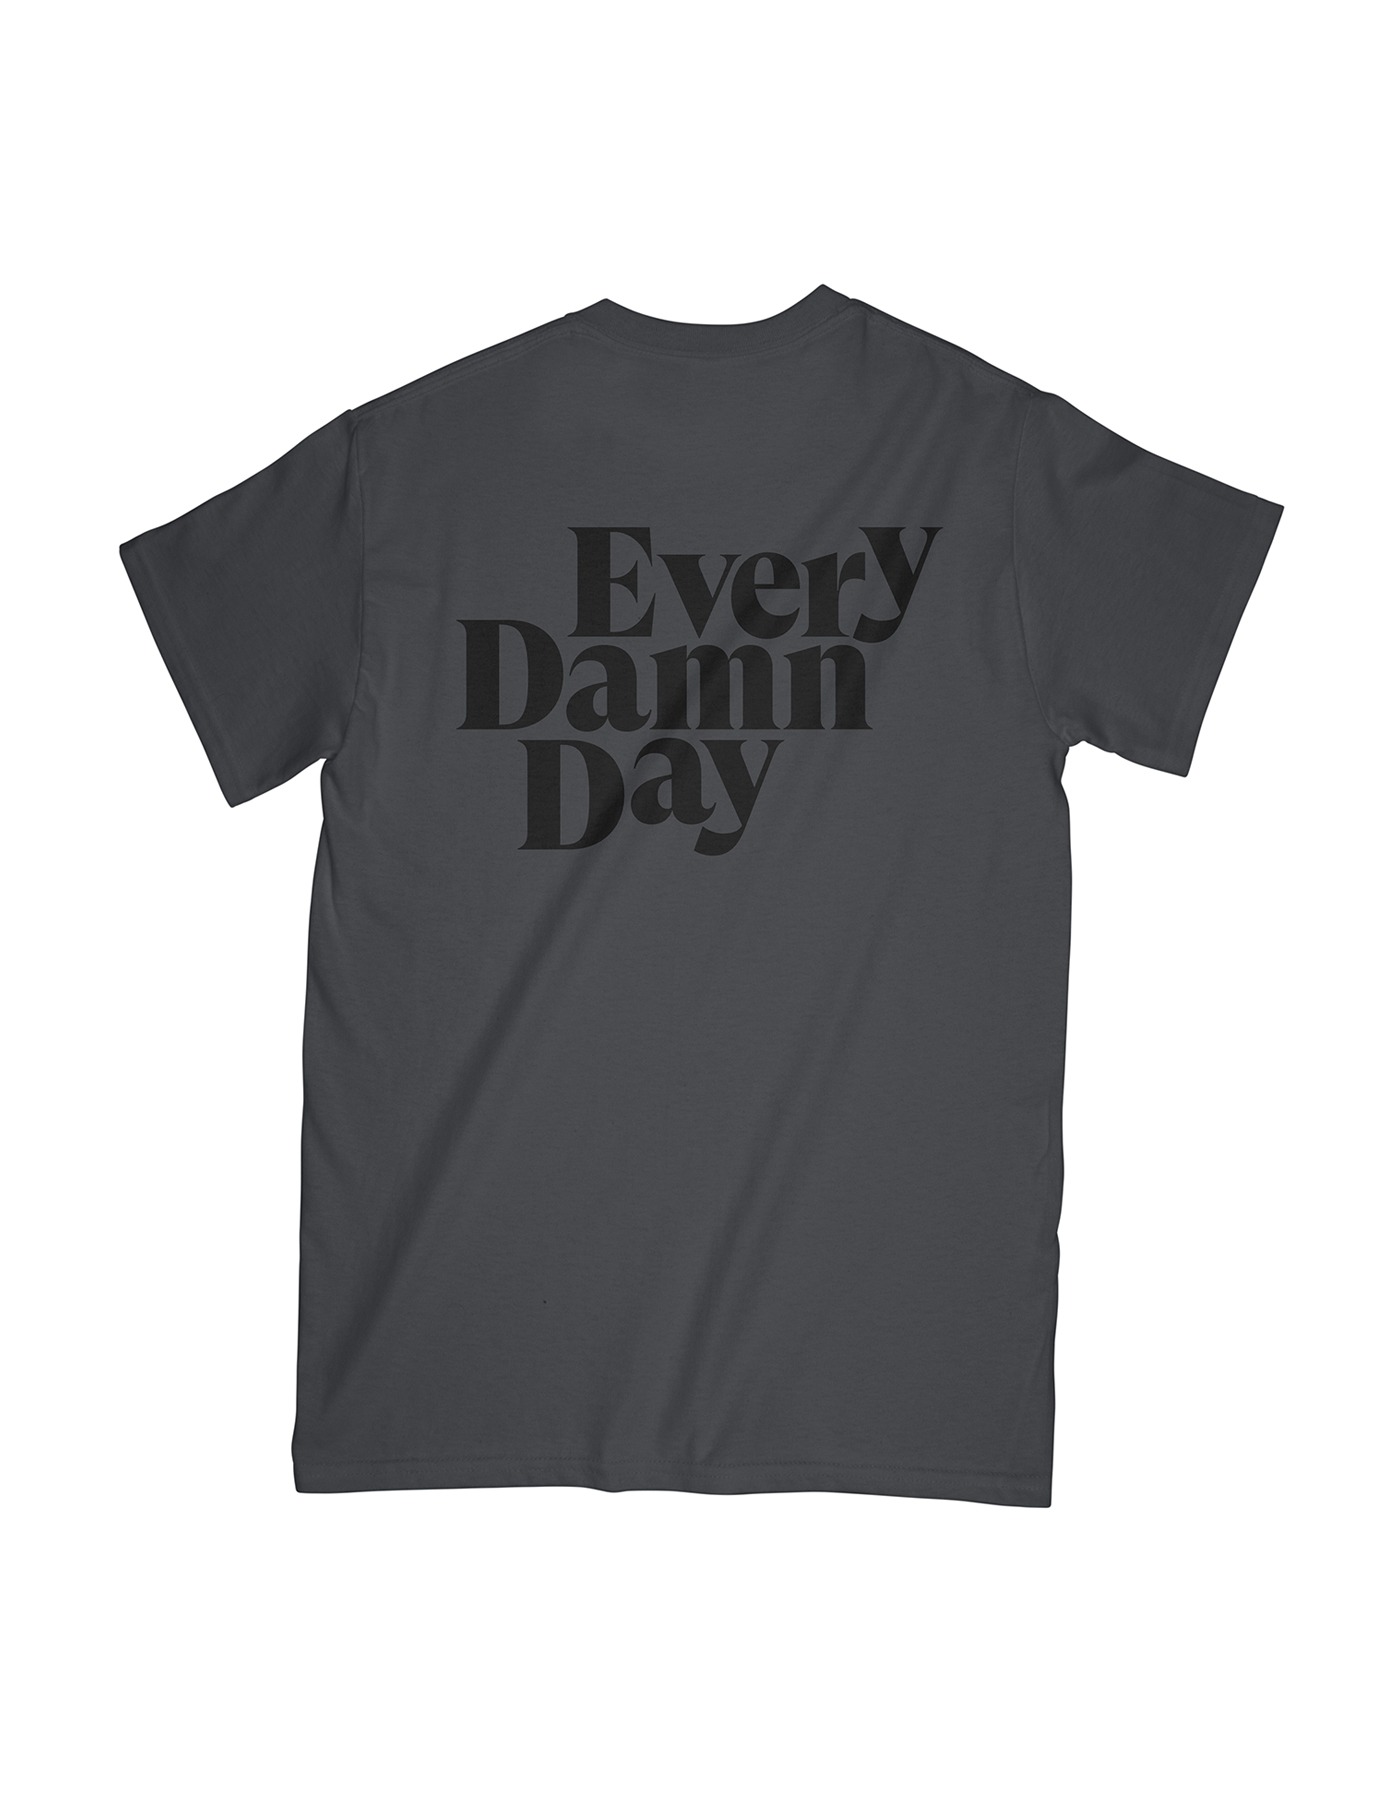 Every Damn Day T-shirts - Charcoal/Black